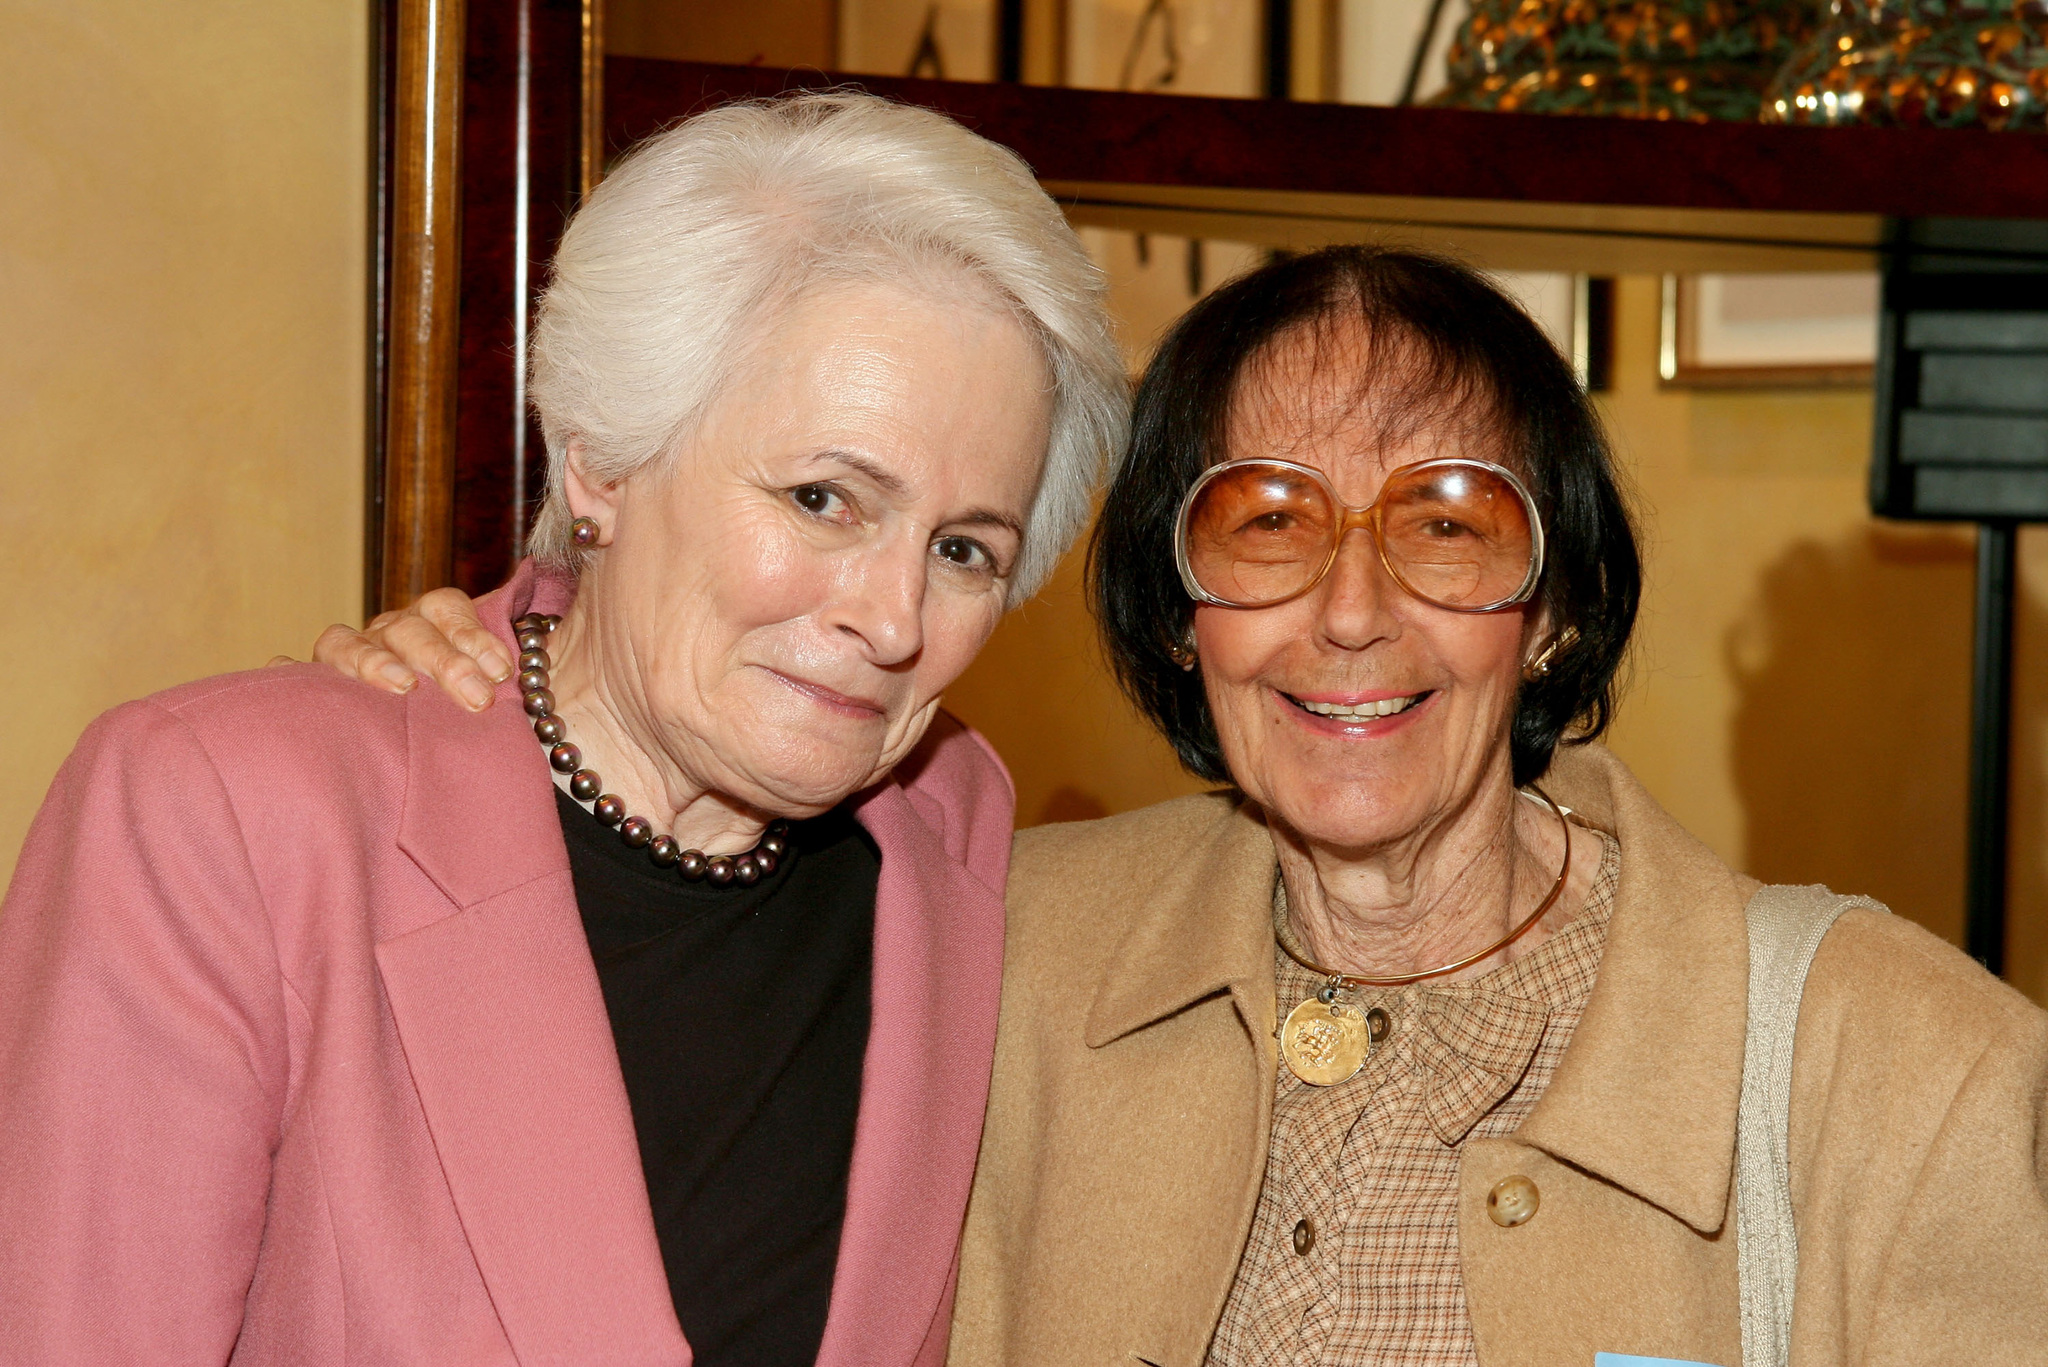 Jean Firstenberg and Fay Kanin